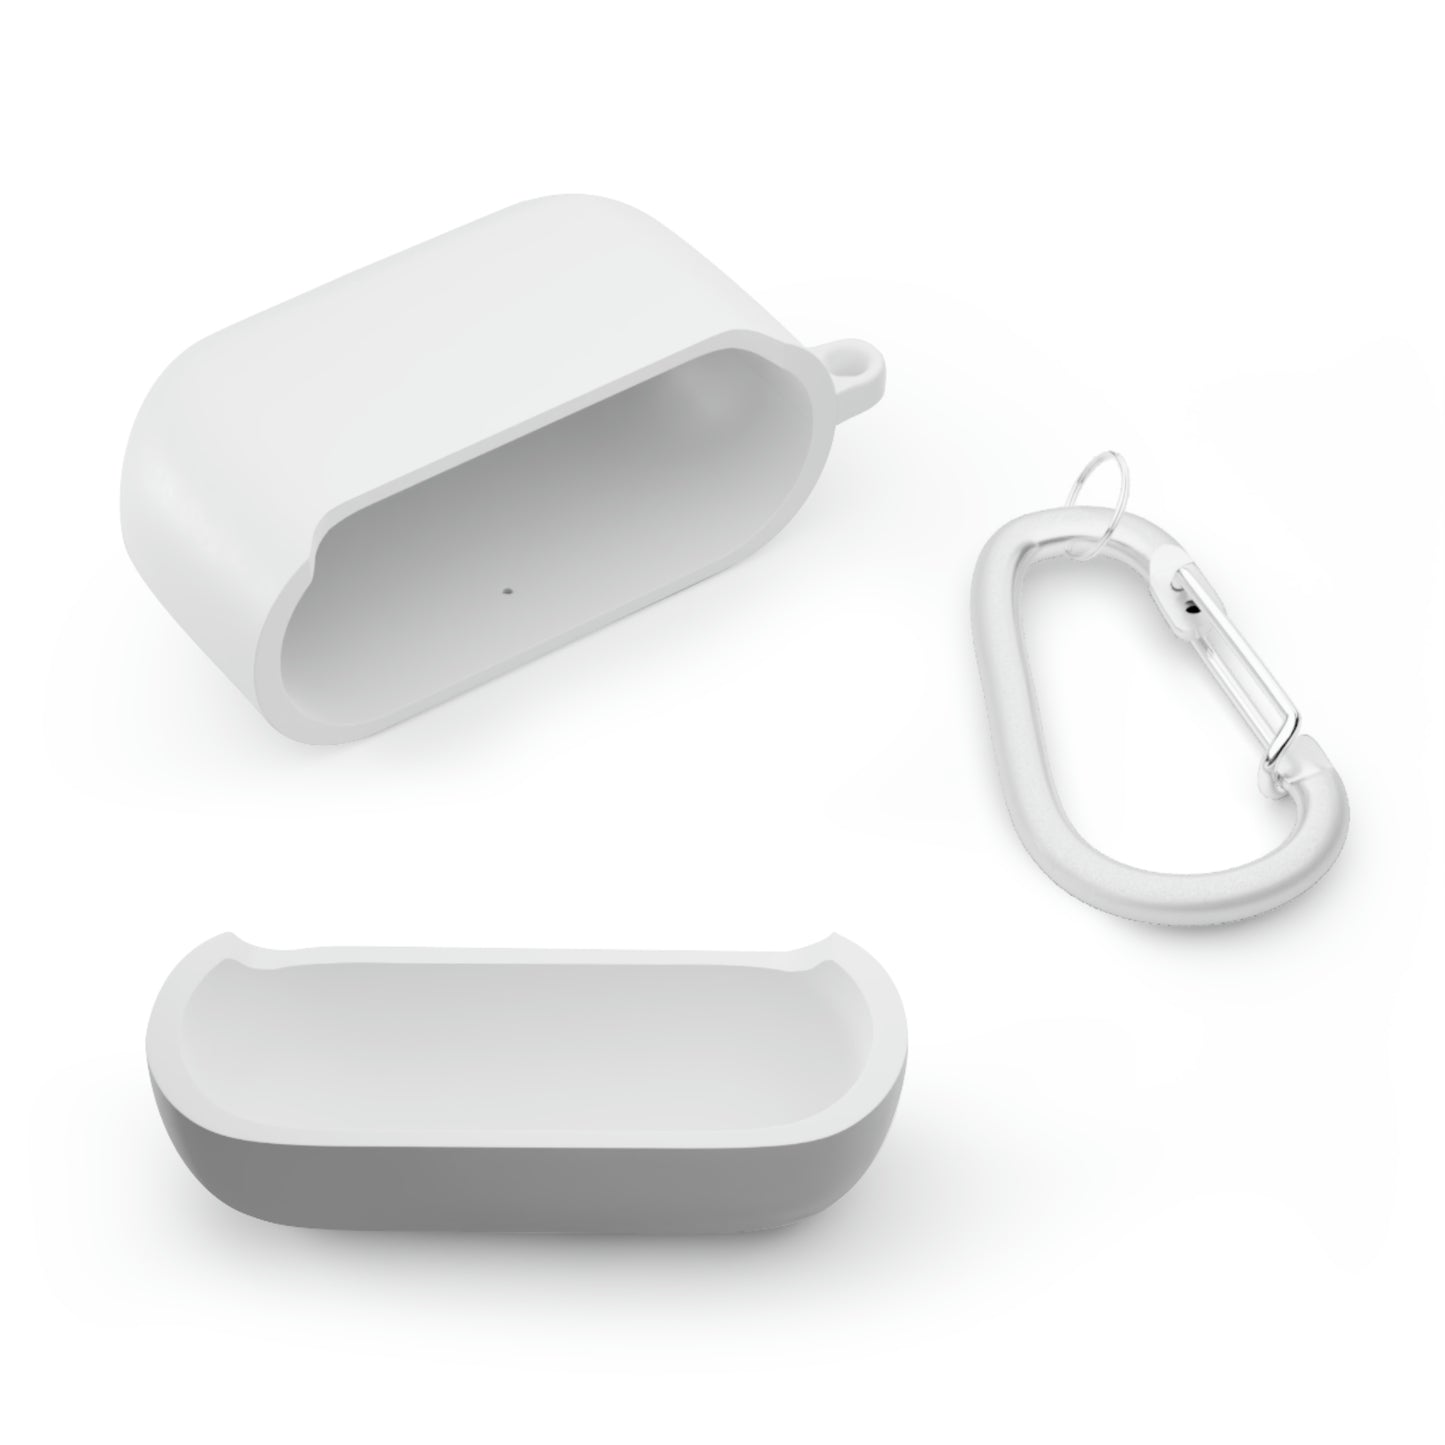 Sky Hawks AirPods and AirPods Pro Case Cover